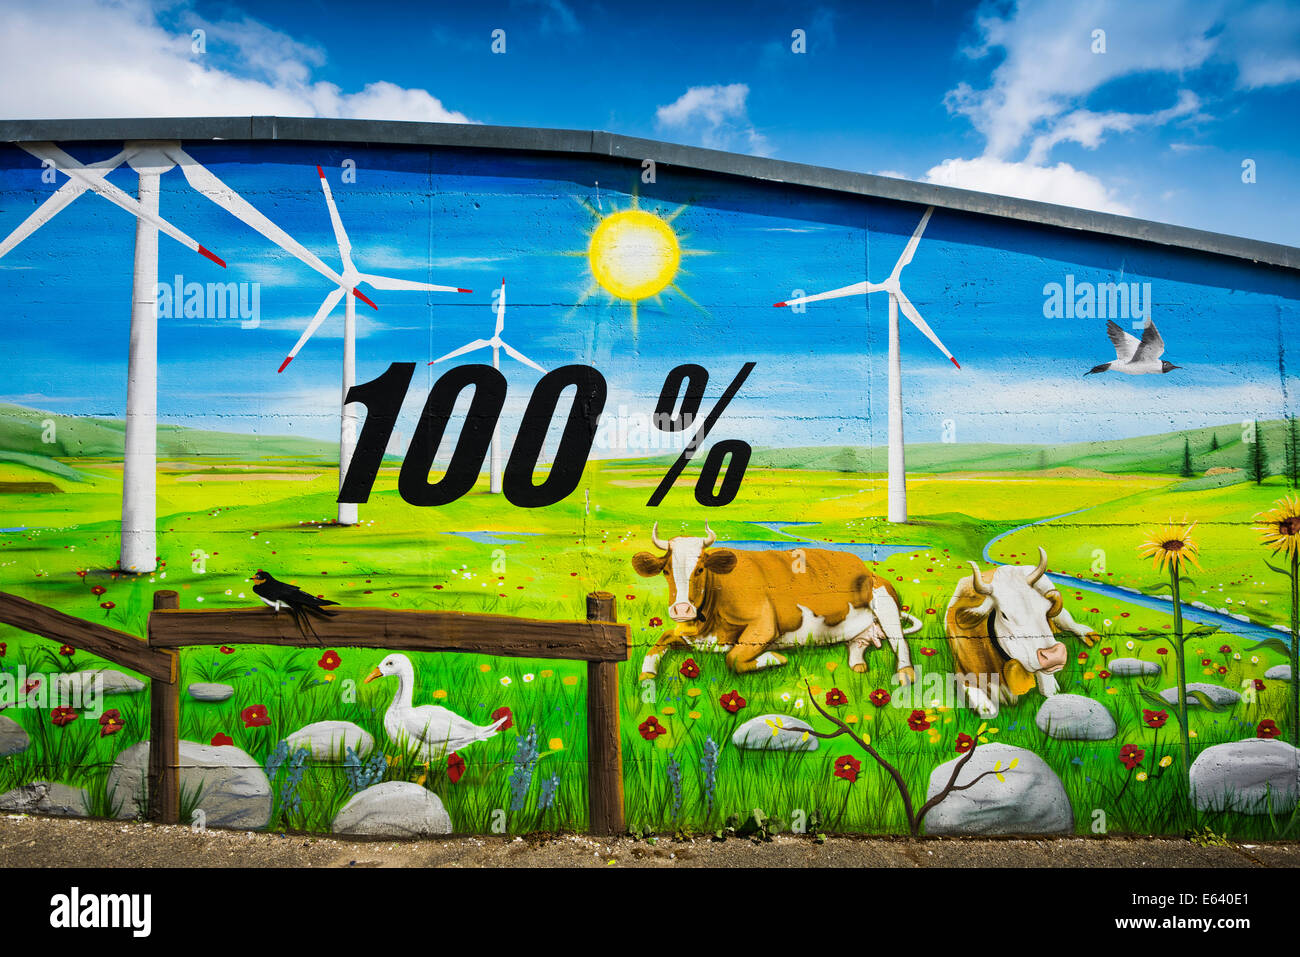 Wall of a house painted with a renewable energy theme, Tiengen, Waldshut-Tiengen, Baden-Württemberg, Germany Stock Photo